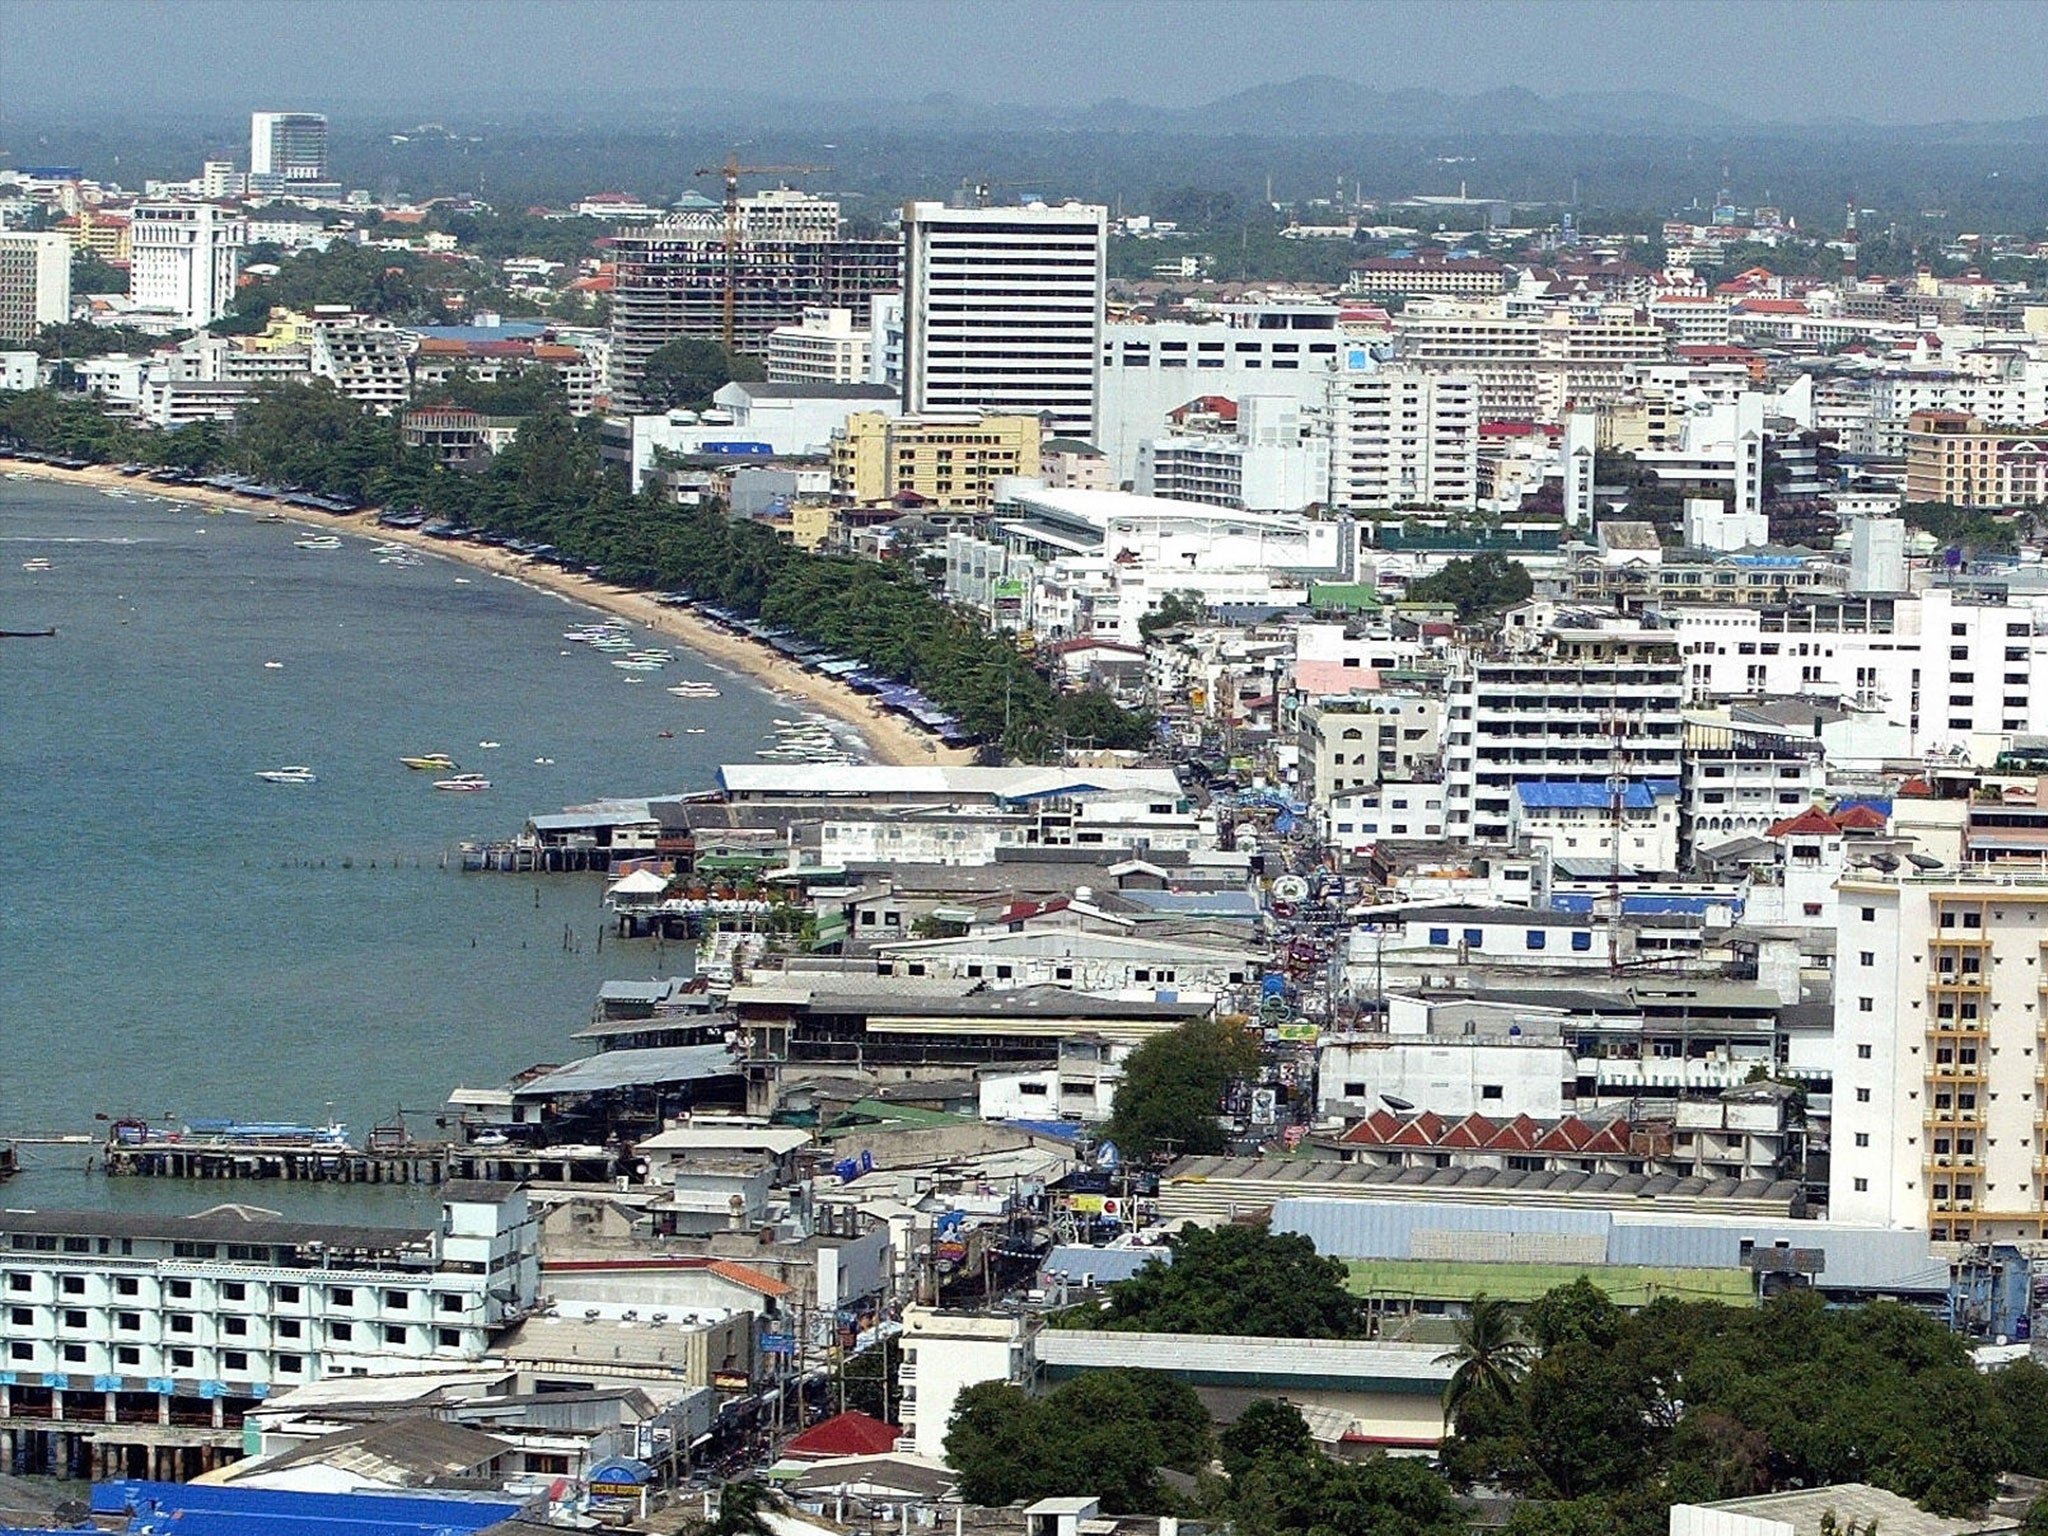 The coast of the holiday resort town of Pattaya, around 100 miles east of the Thai capital Bangkok